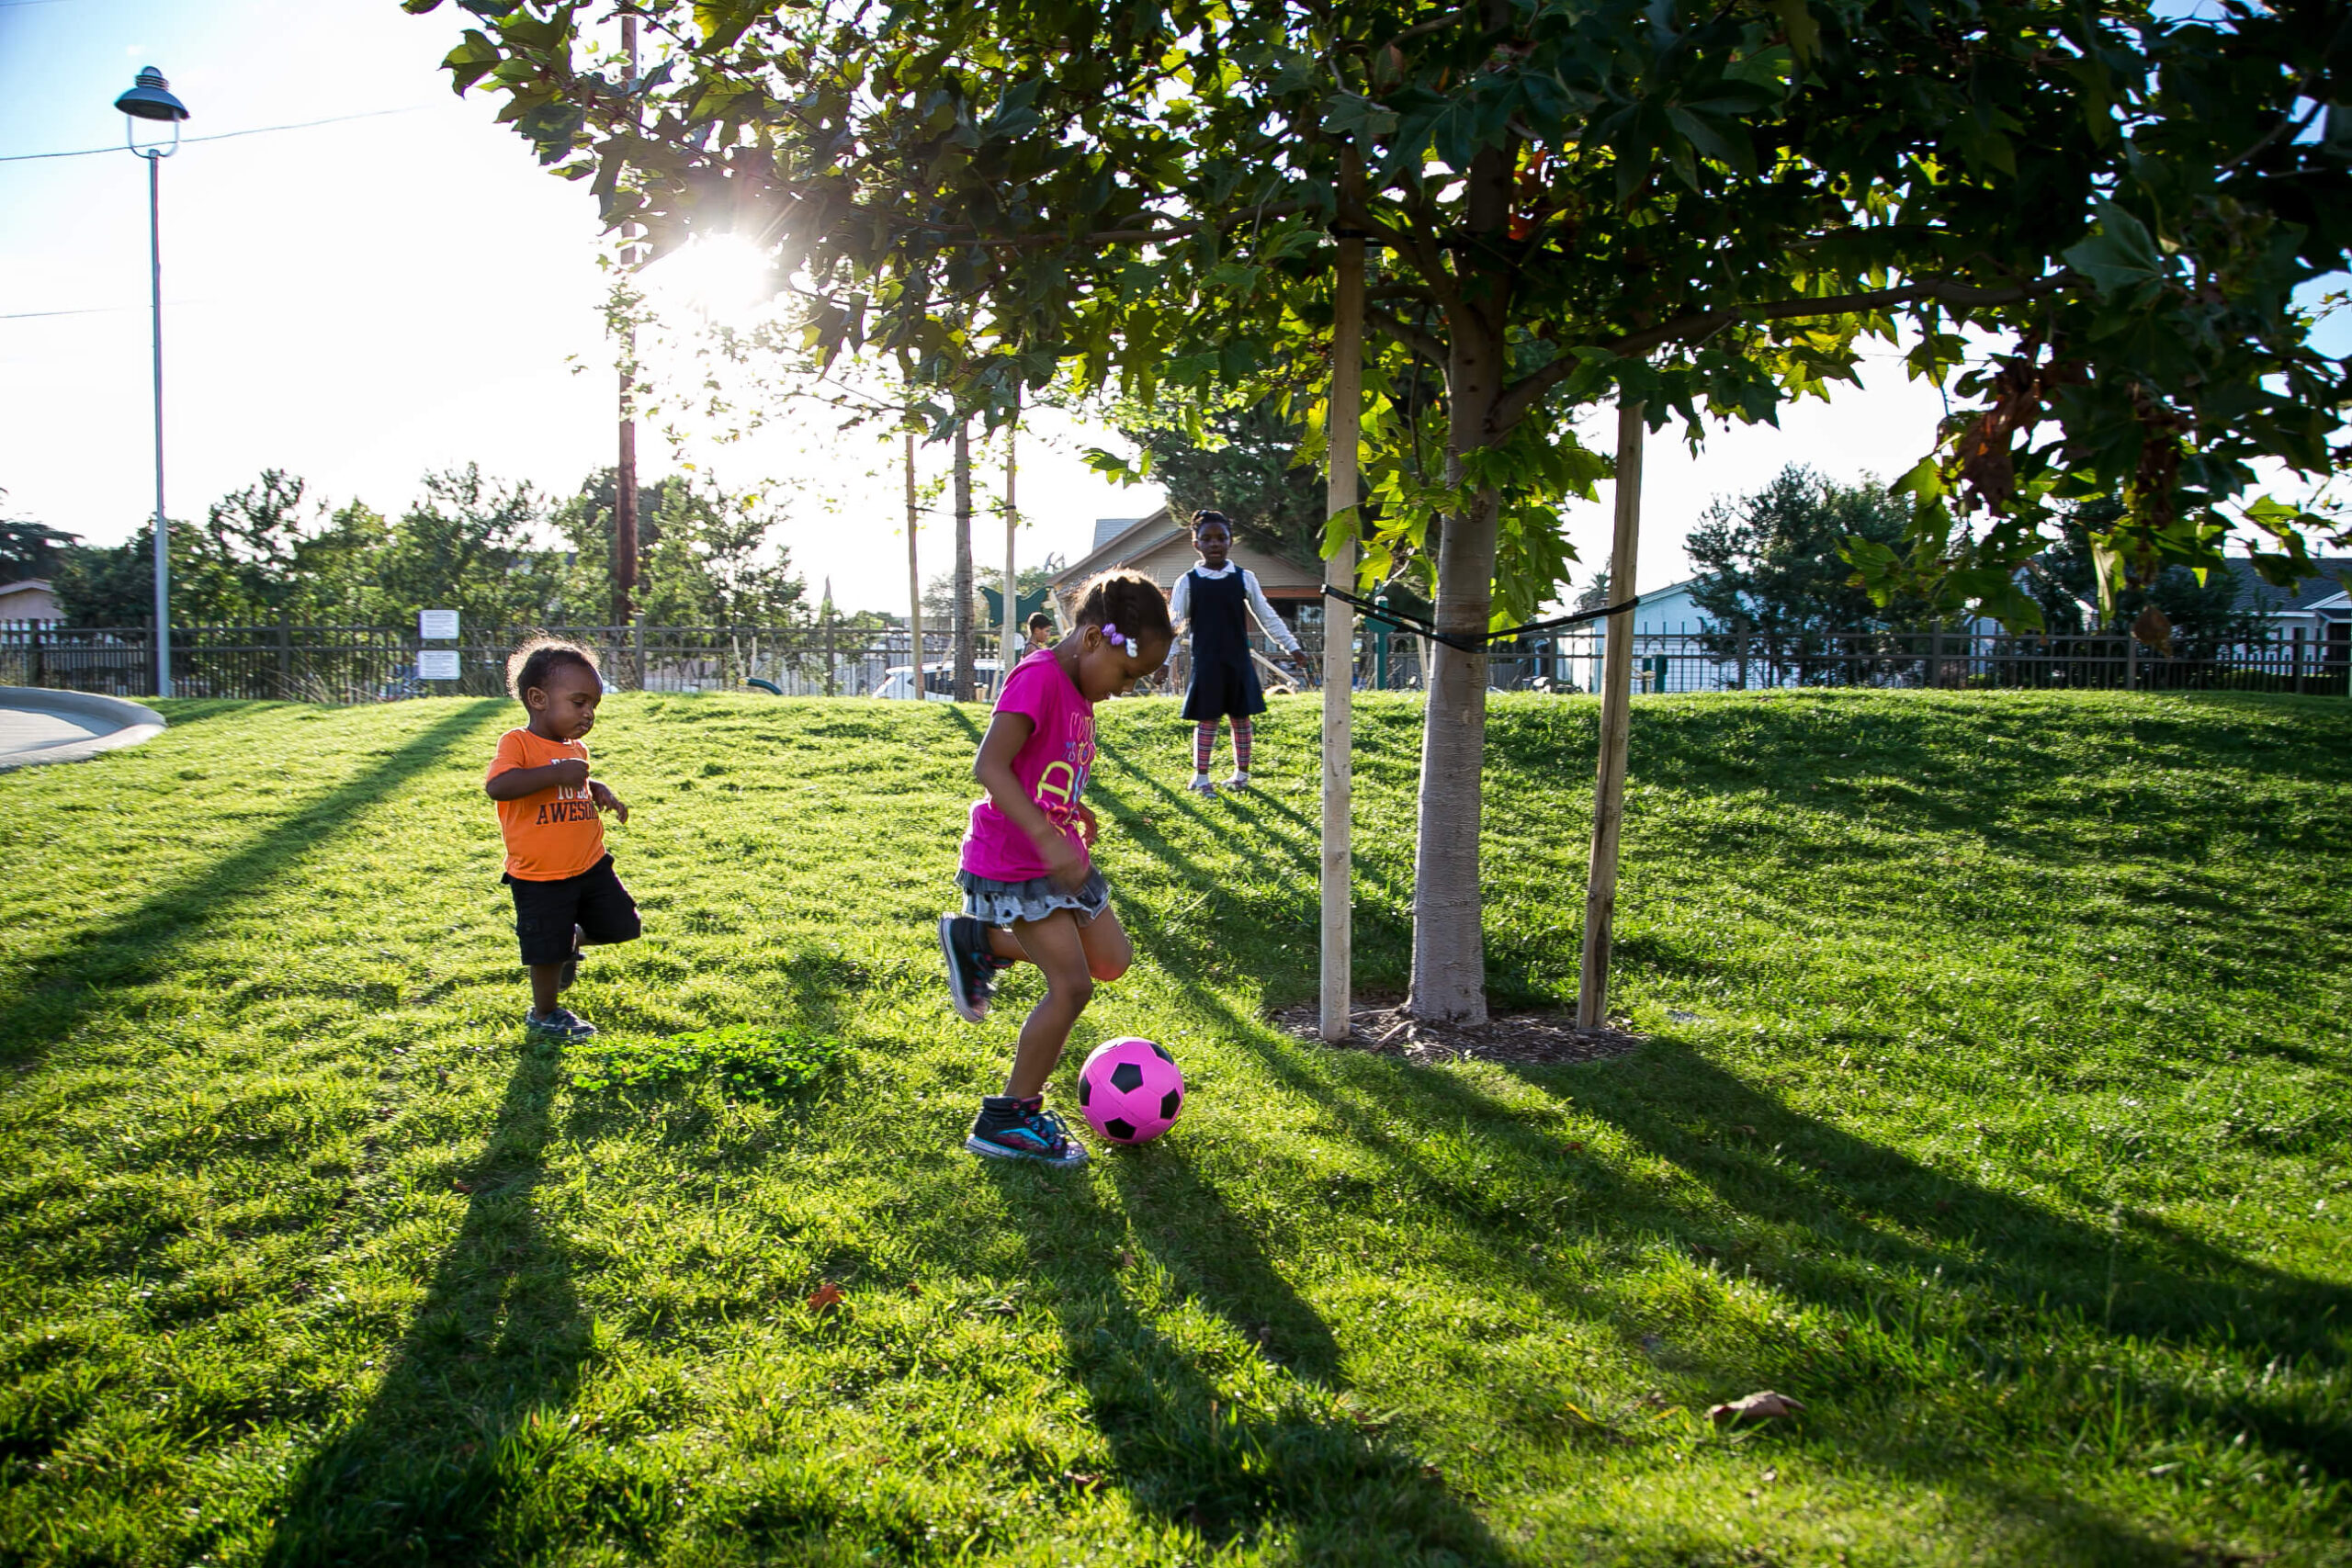 A group of children kicking a soccer ball in a park.